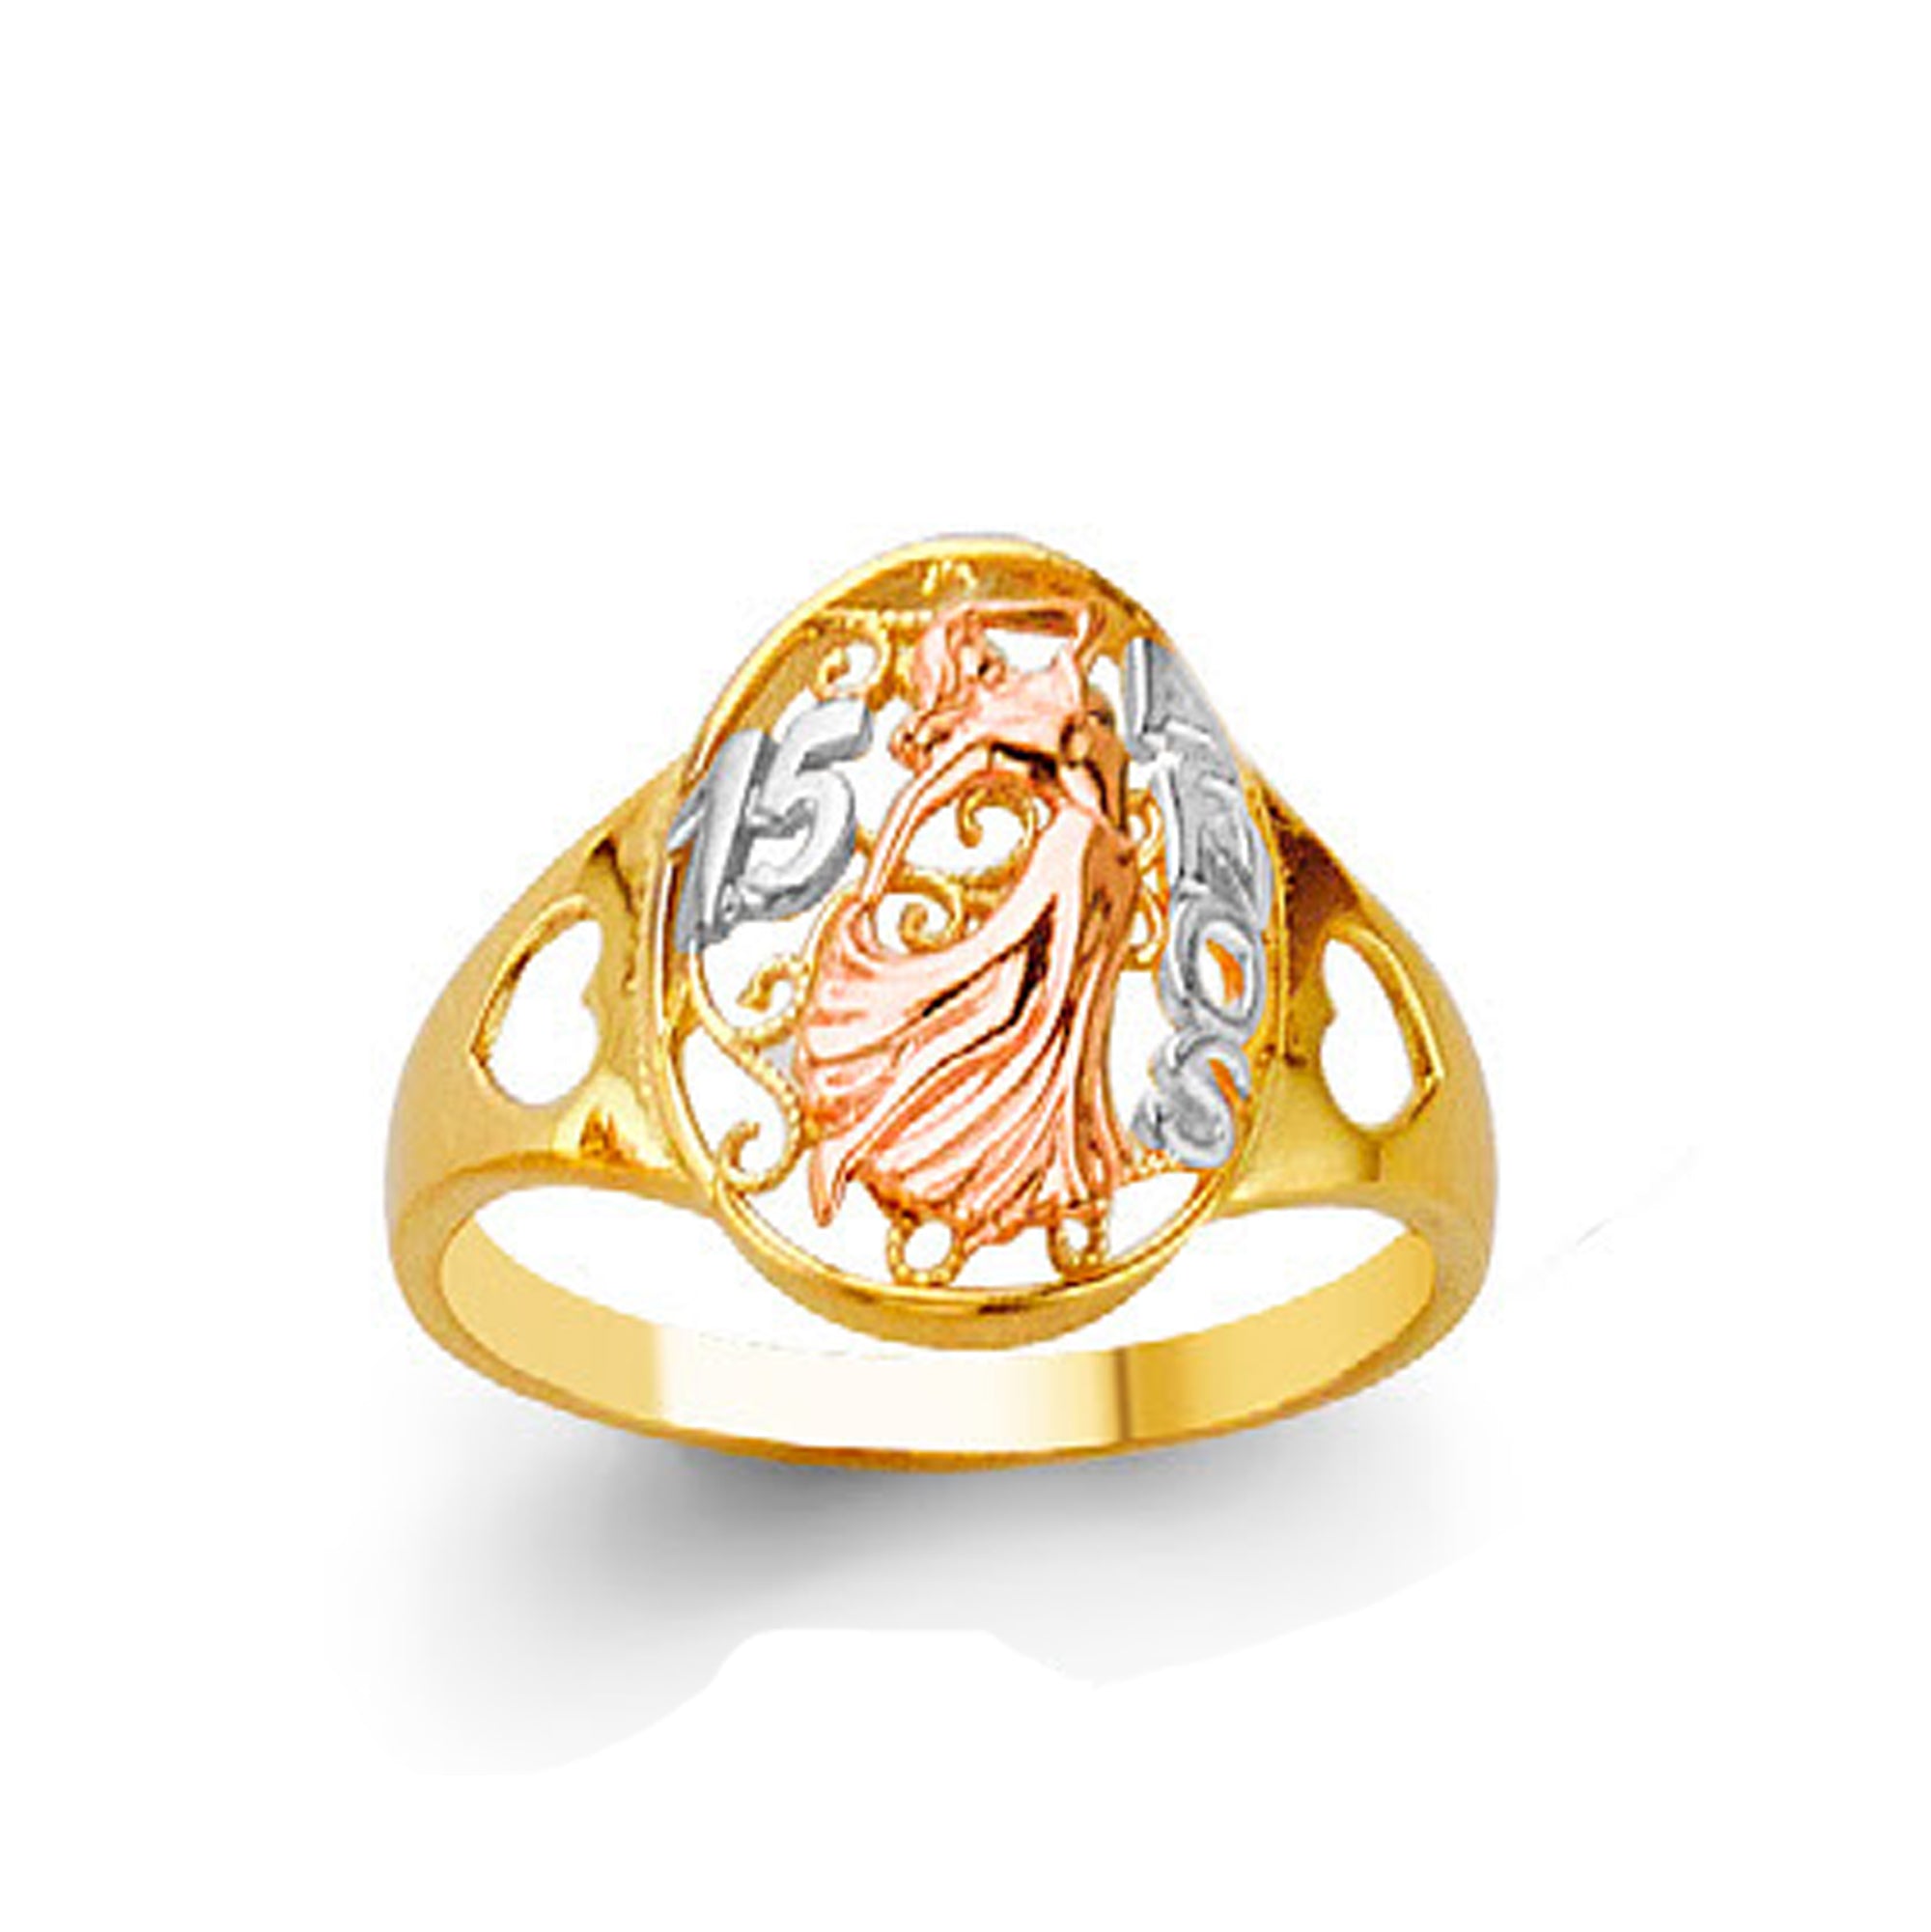 Multi-hued Oval Filigree Anos Ring in Solid Gold 